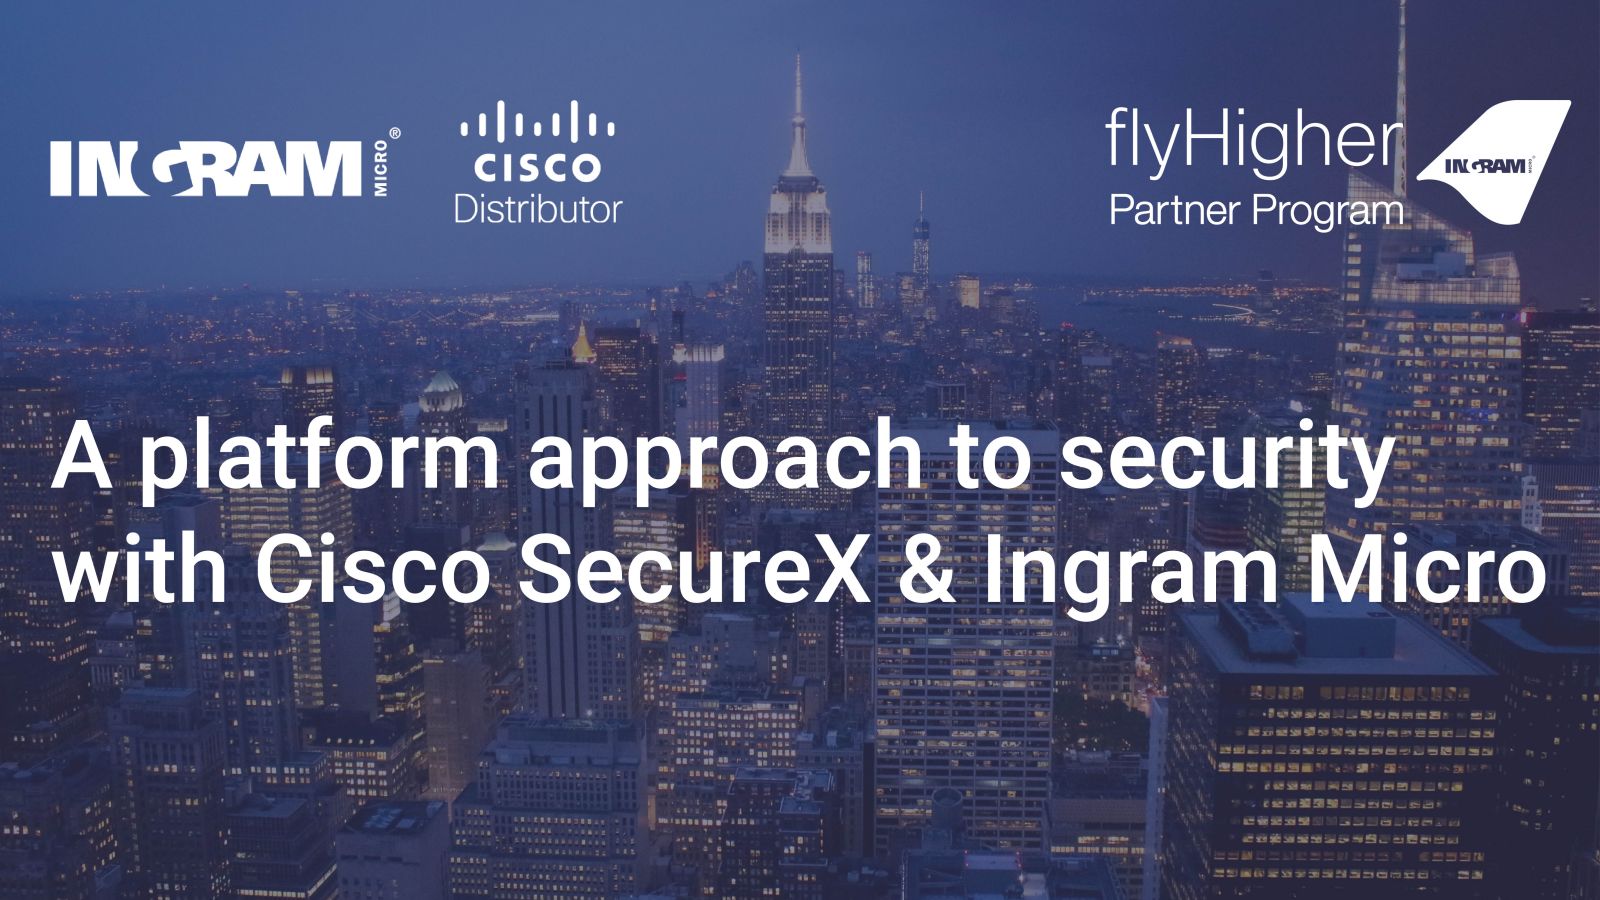 ON DEMAND - A platform approach  to security with Cisco SecureX & Ingram Micro Featured Image